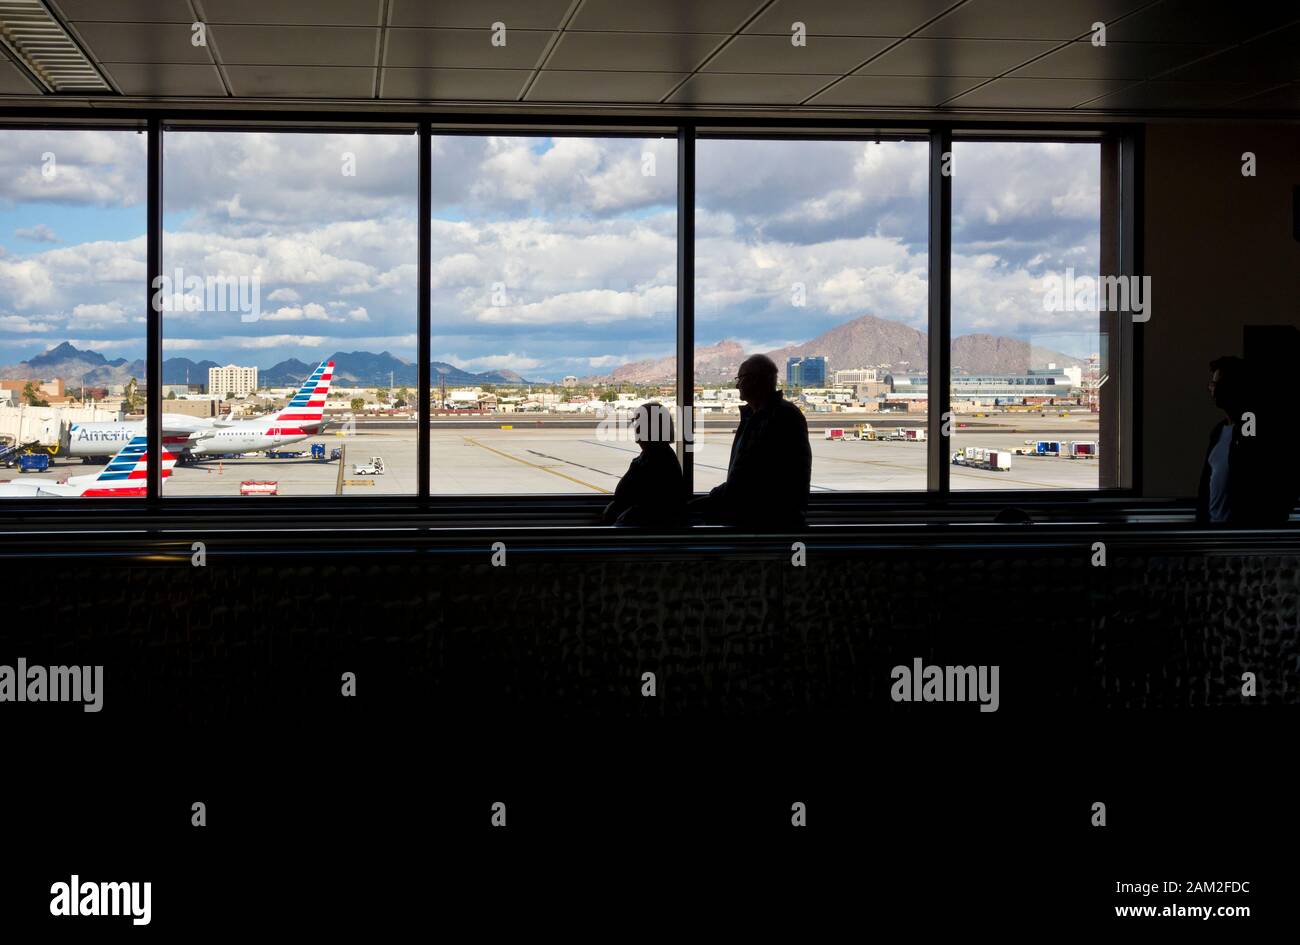 Phoenix Sky Harbor Airport with window views of the planes and tarmac as well as travelers in the airport. Stock Photo